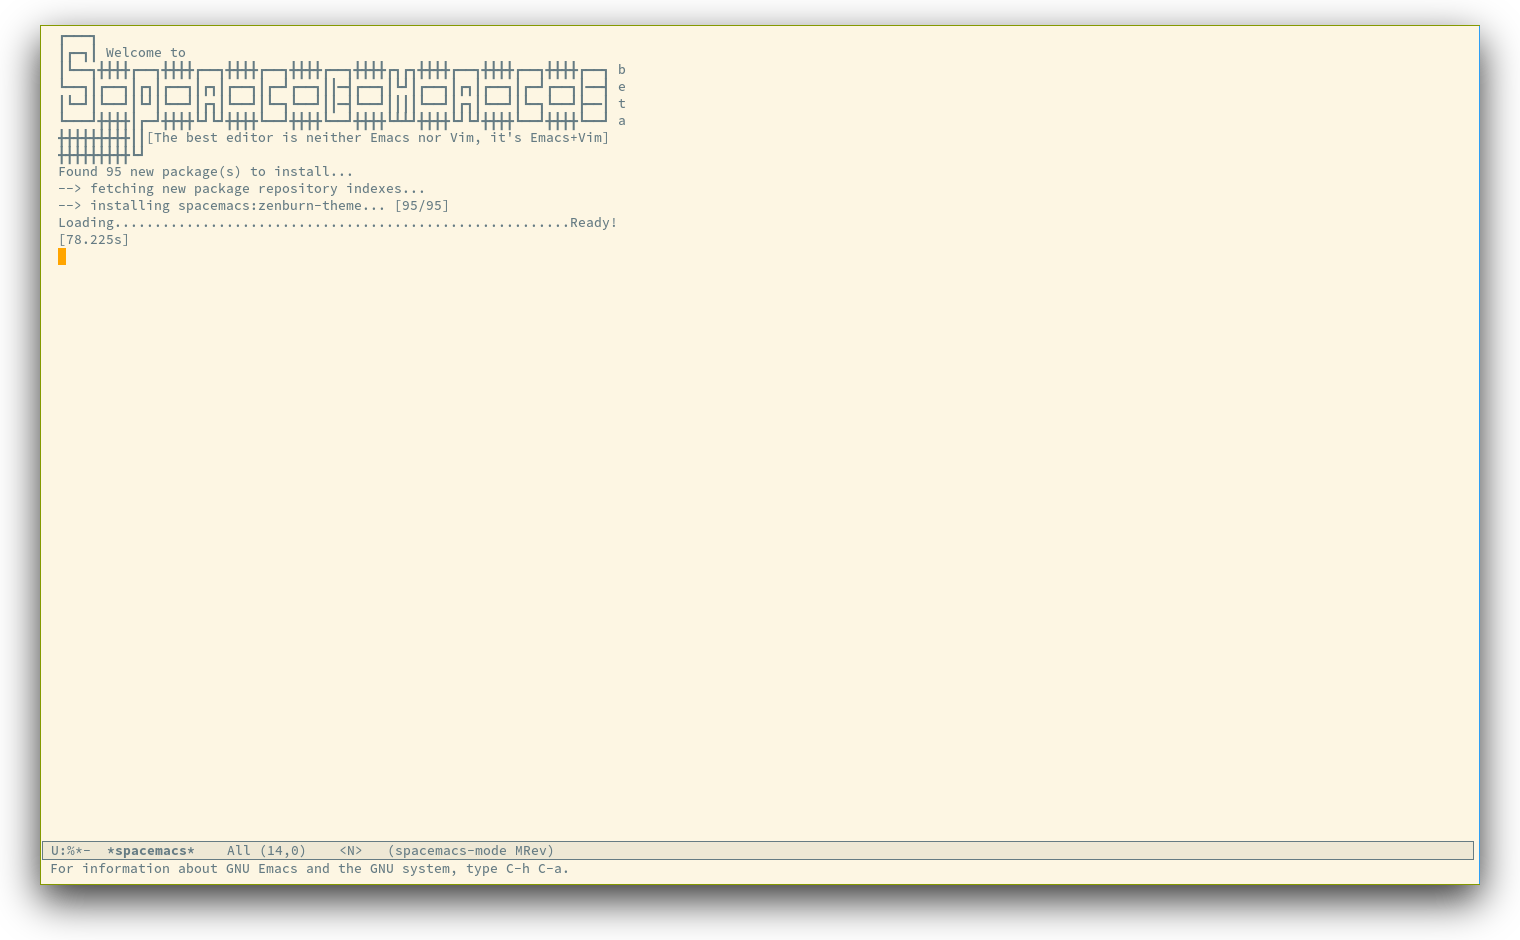 /TakeV/spacemacs/media/commit/5f0c70636a4f8ea06cab6fad01a6c2b62732d9cc/doc/img/spacemacs-startup.png